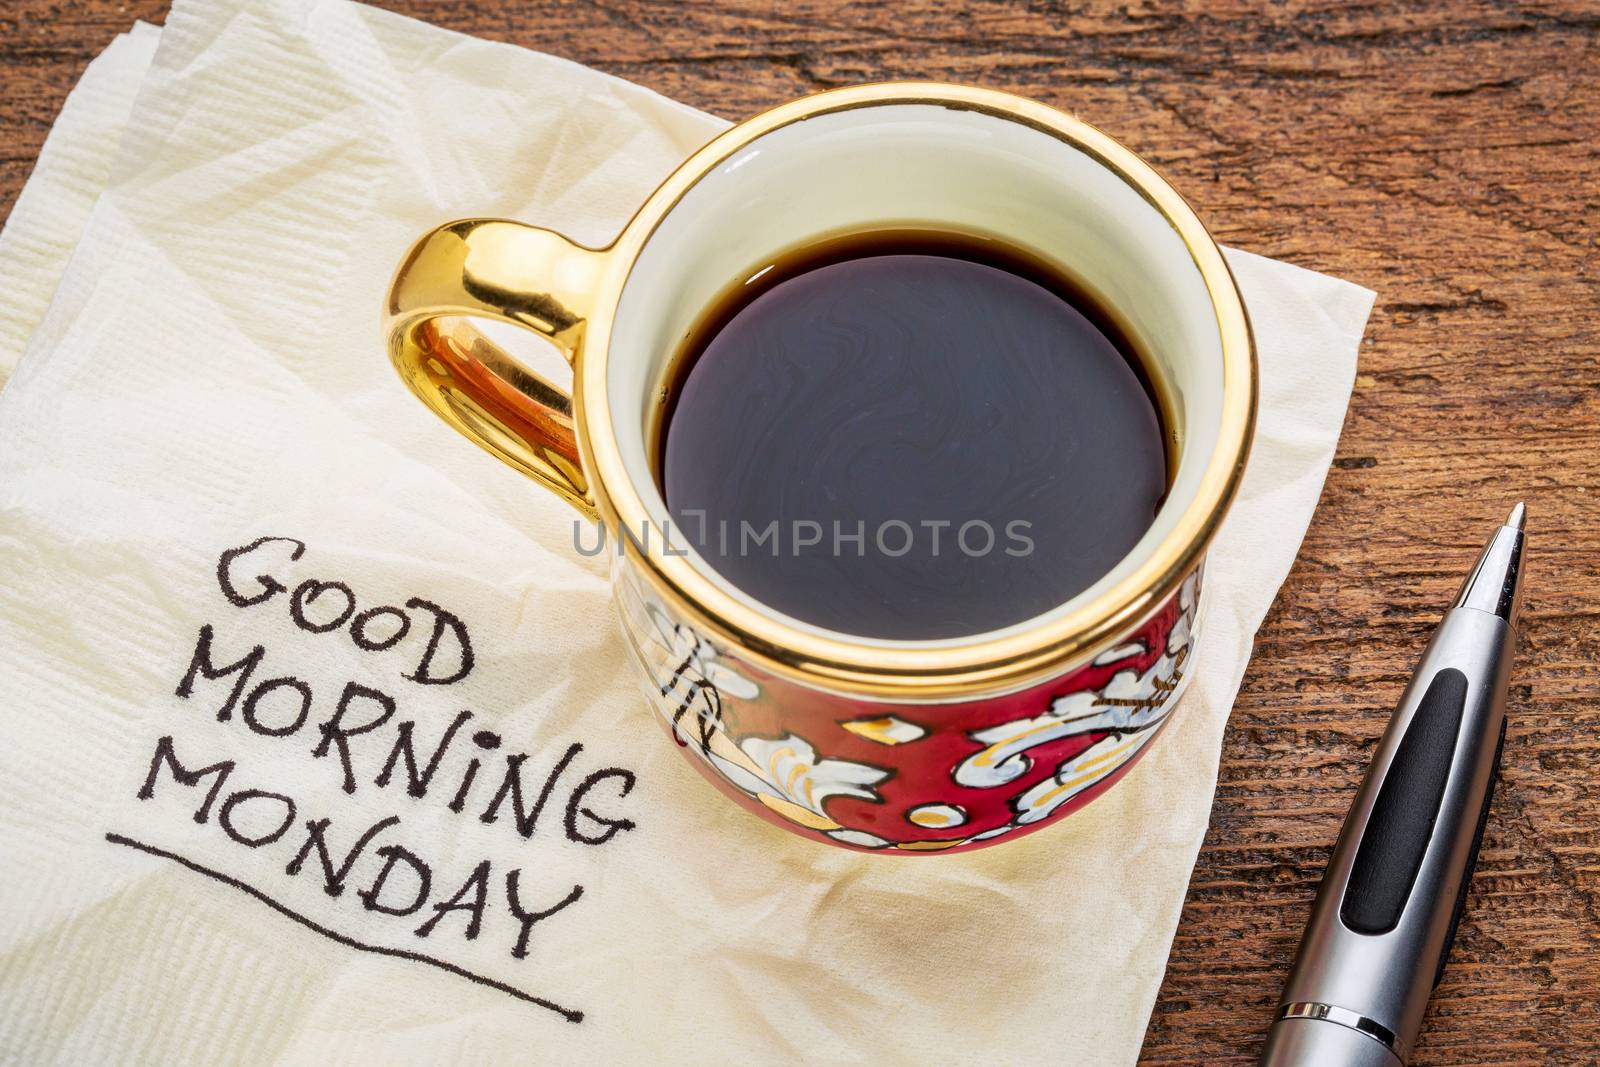 Good morning, Monday - handwriting on a napkin with a cup of coffee